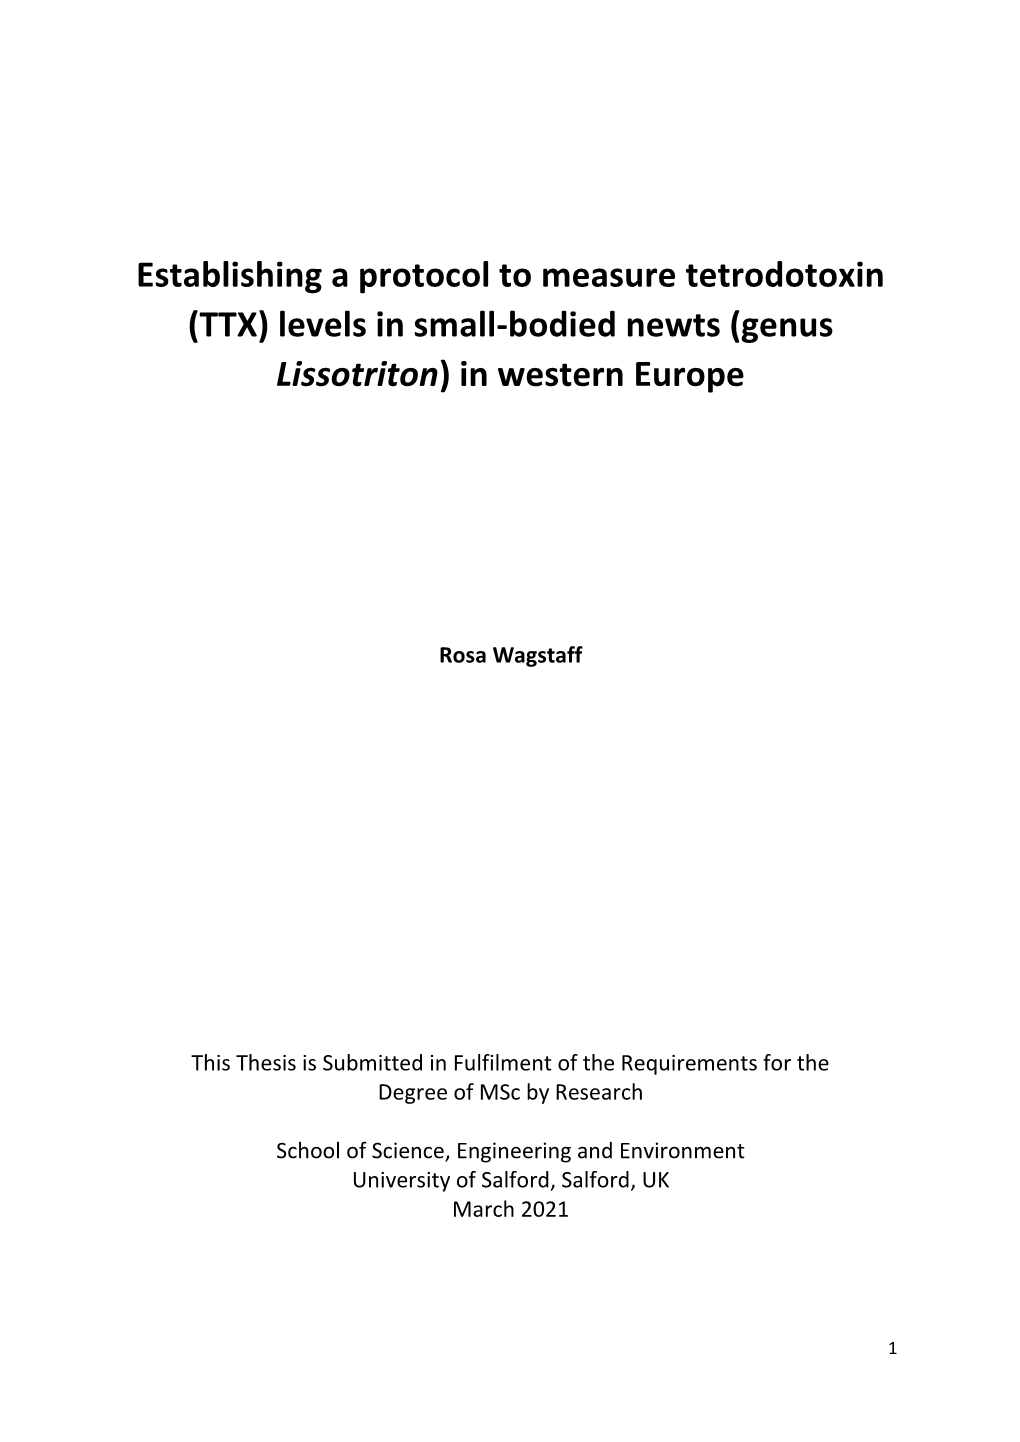 Establishing a Protocol to Measure Tetrodotoxin (TTX) Levels in Small-Bodied Newts (Genus Lissotriton) in Western Europe